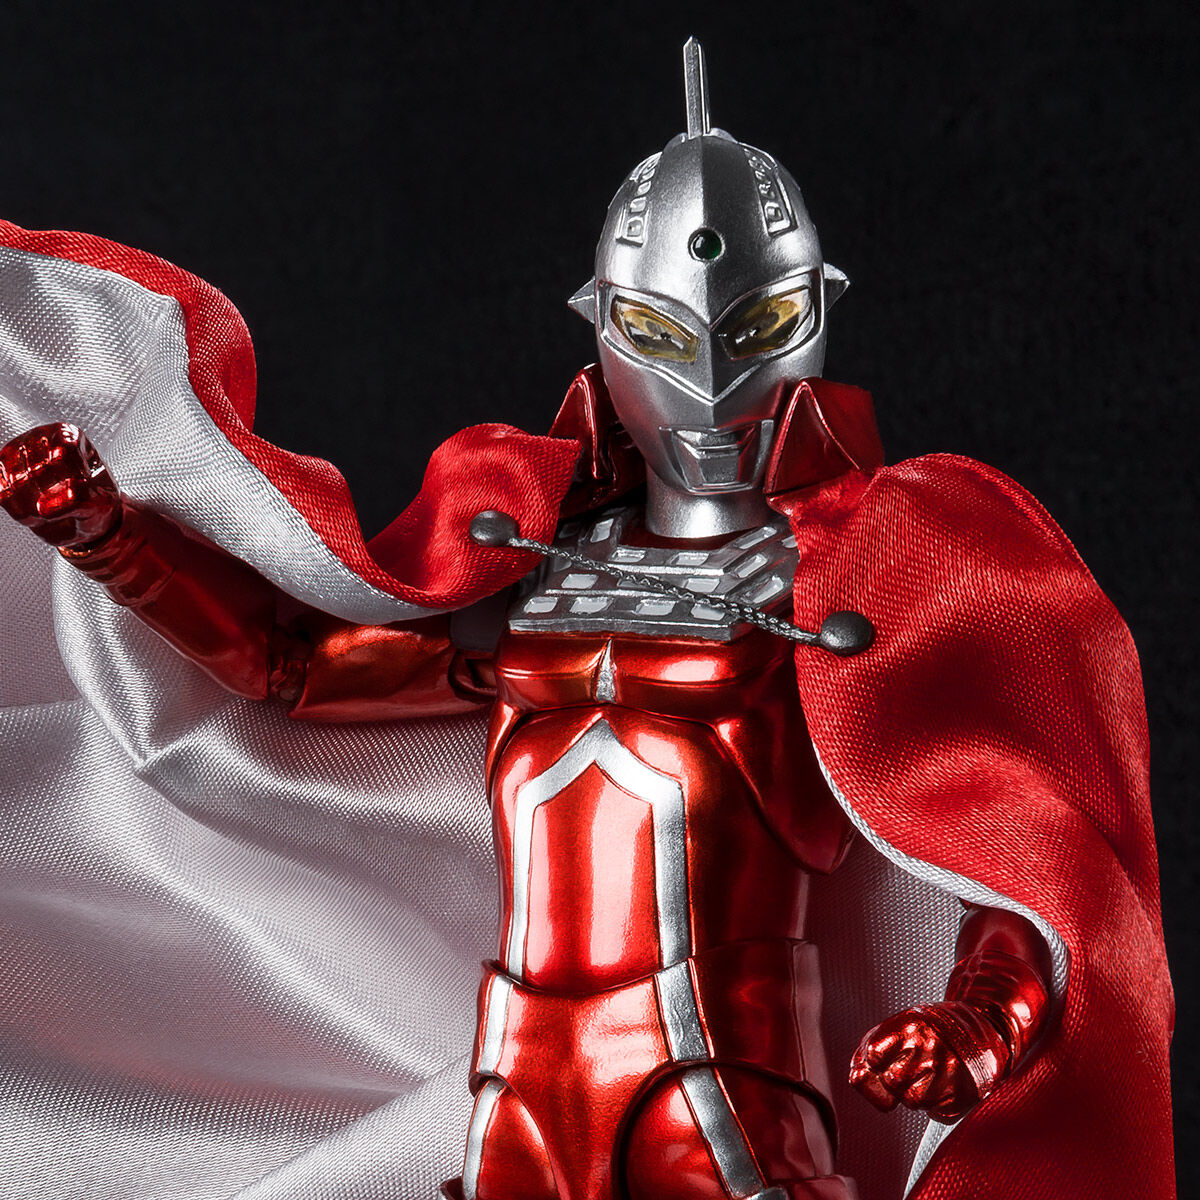 S.H.Figuarts Ultraman Ultraseven 55th Anniversary Action Figure